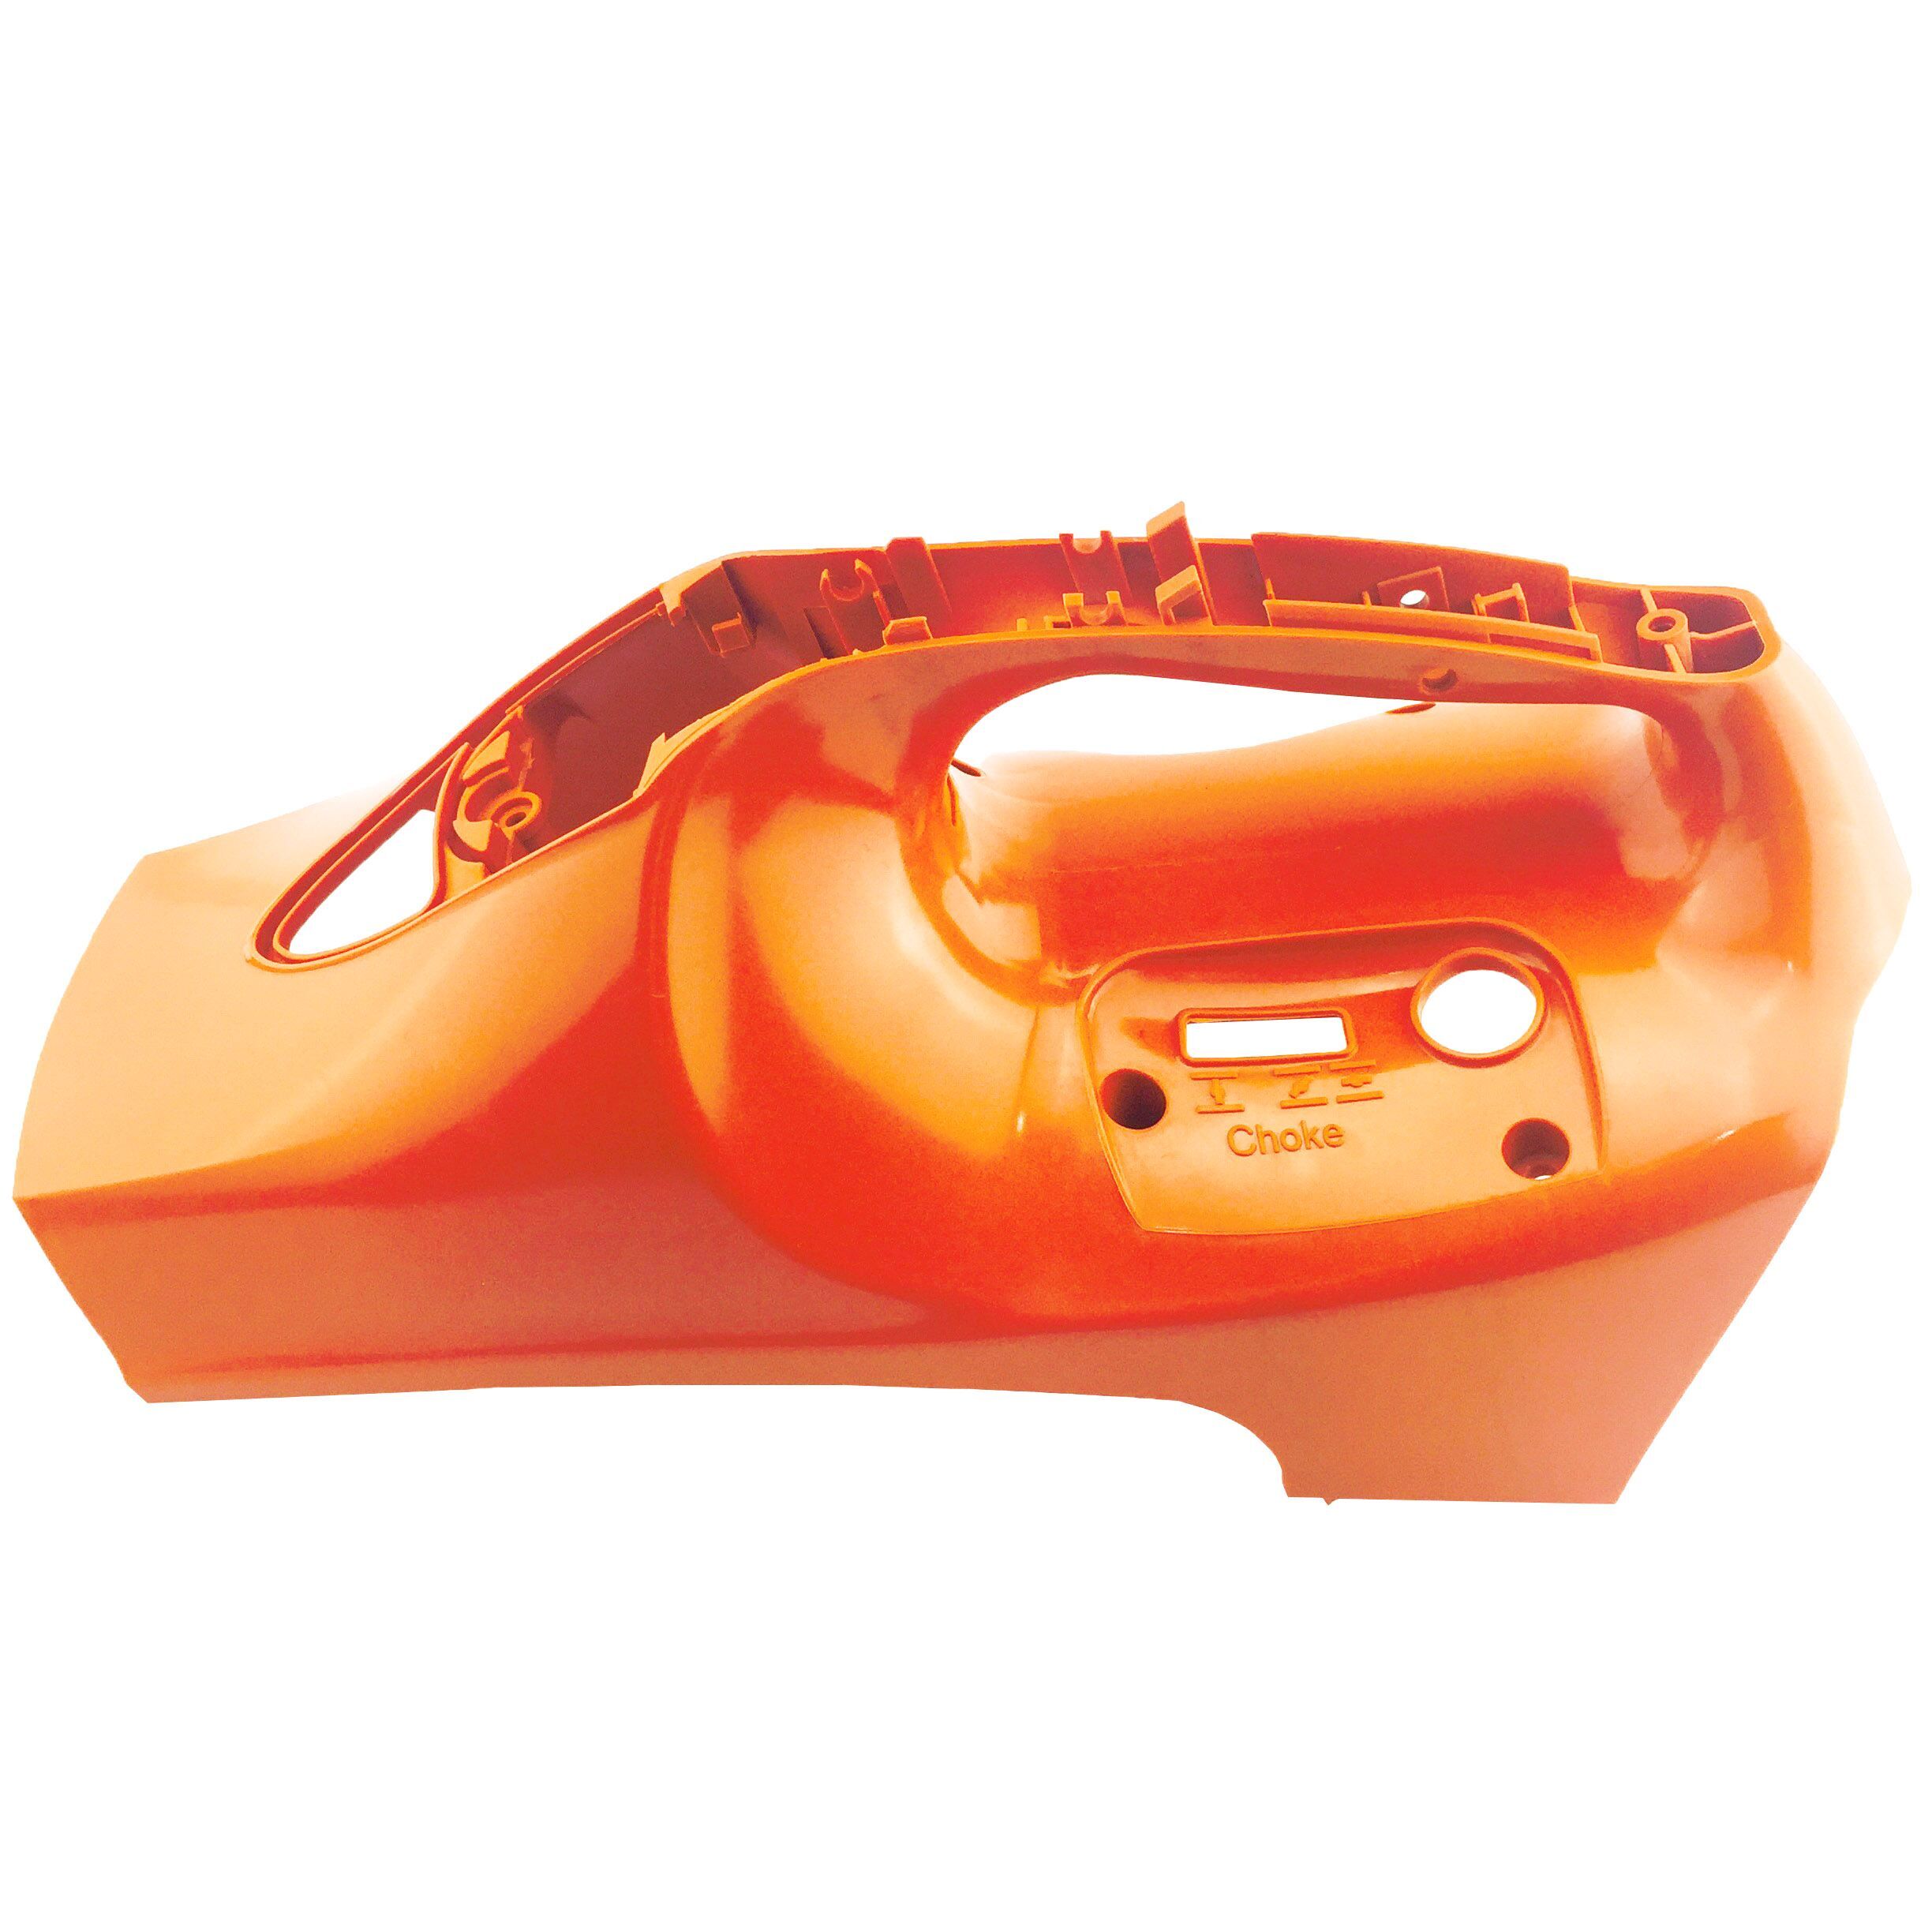 Aftermarket Stihl TS410 TS420 Concrete Cut-Off Saw Shroud Top Handle Cover OEM 4238 080 1600